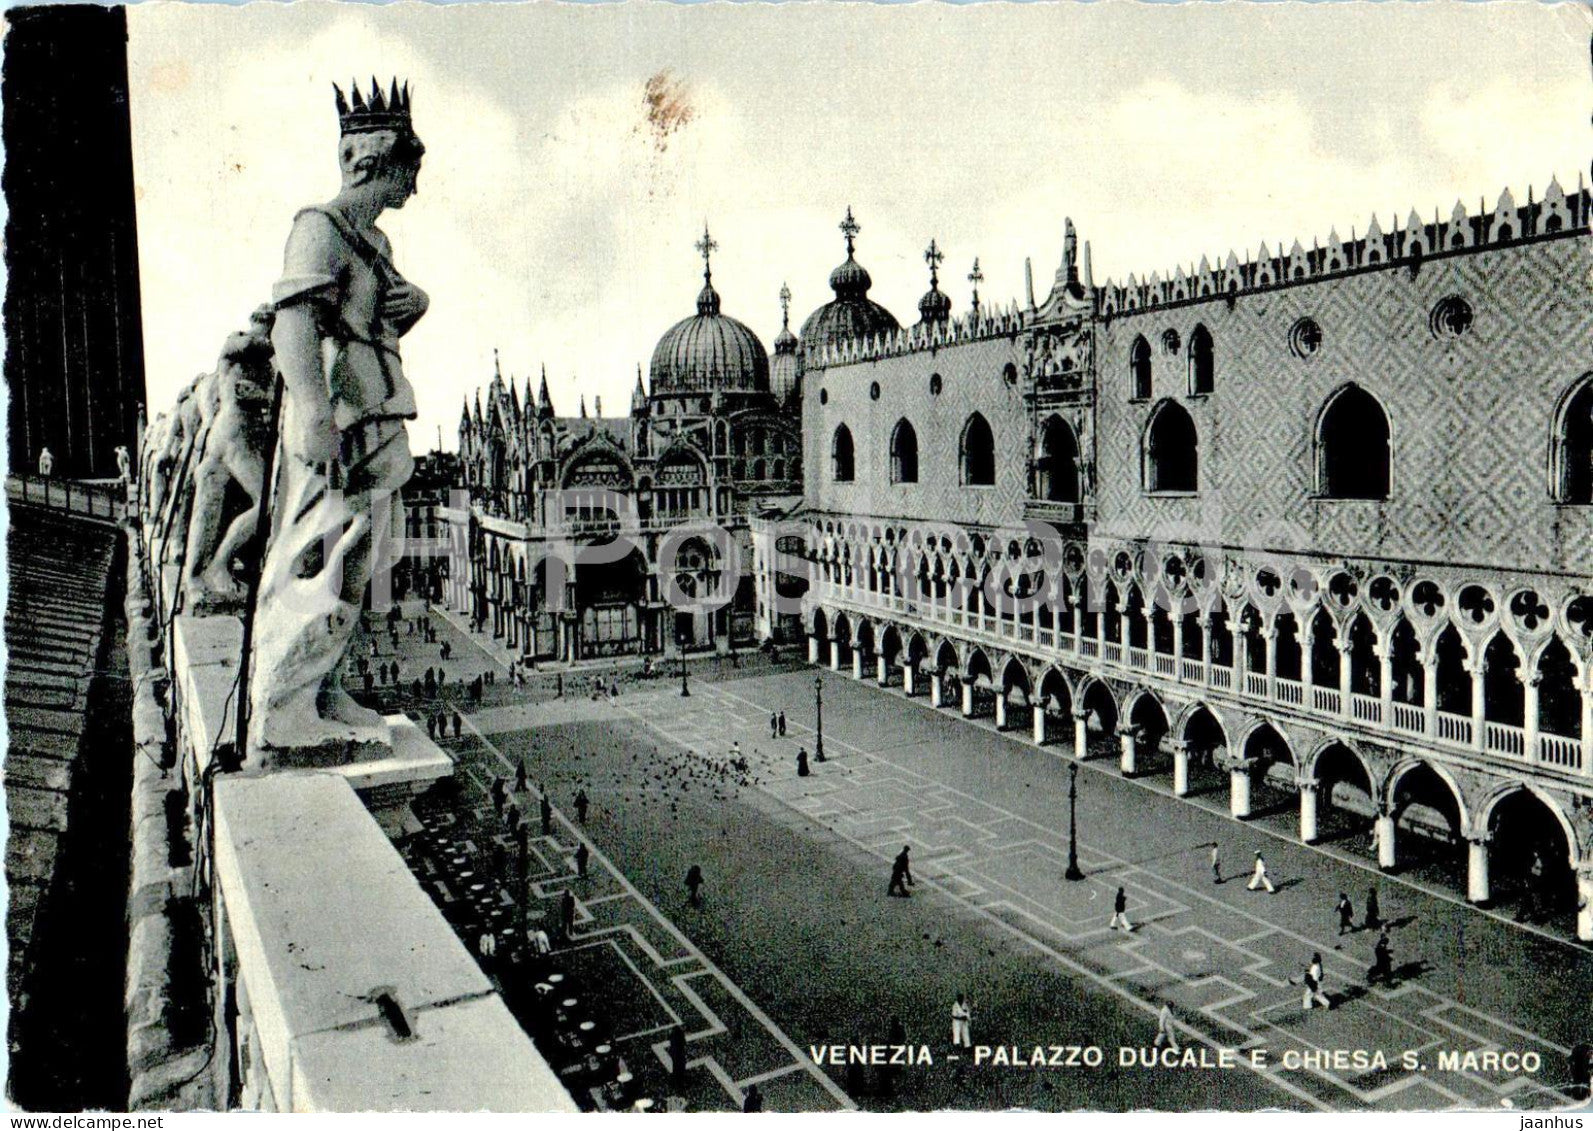 Venezia - Venice - Palazzo Ducale and and Church of St Mark - old postcard - 1950s - Italy - used - JH Postcards